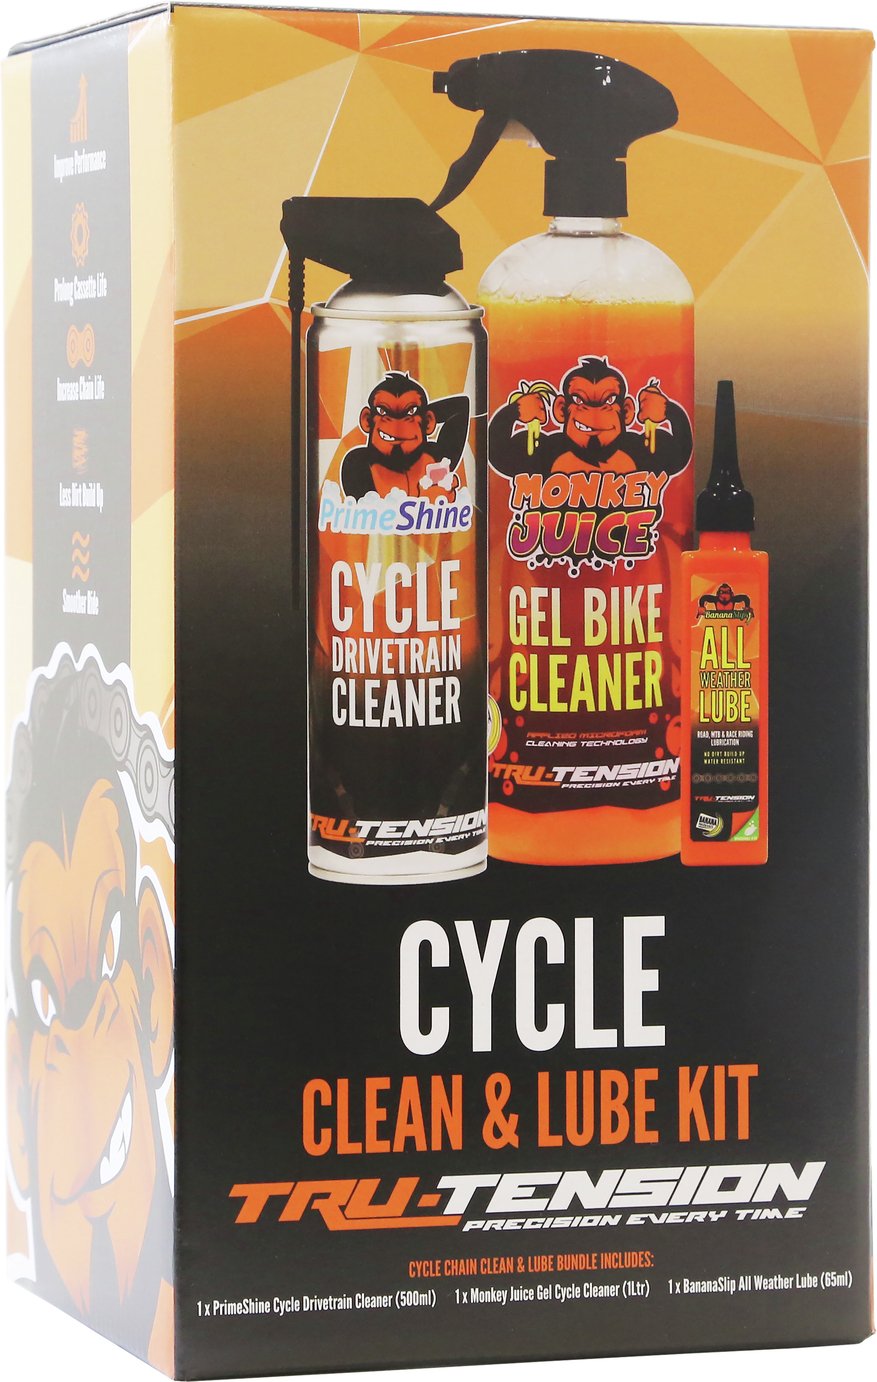 Chain Clean & Lube Bundle Review